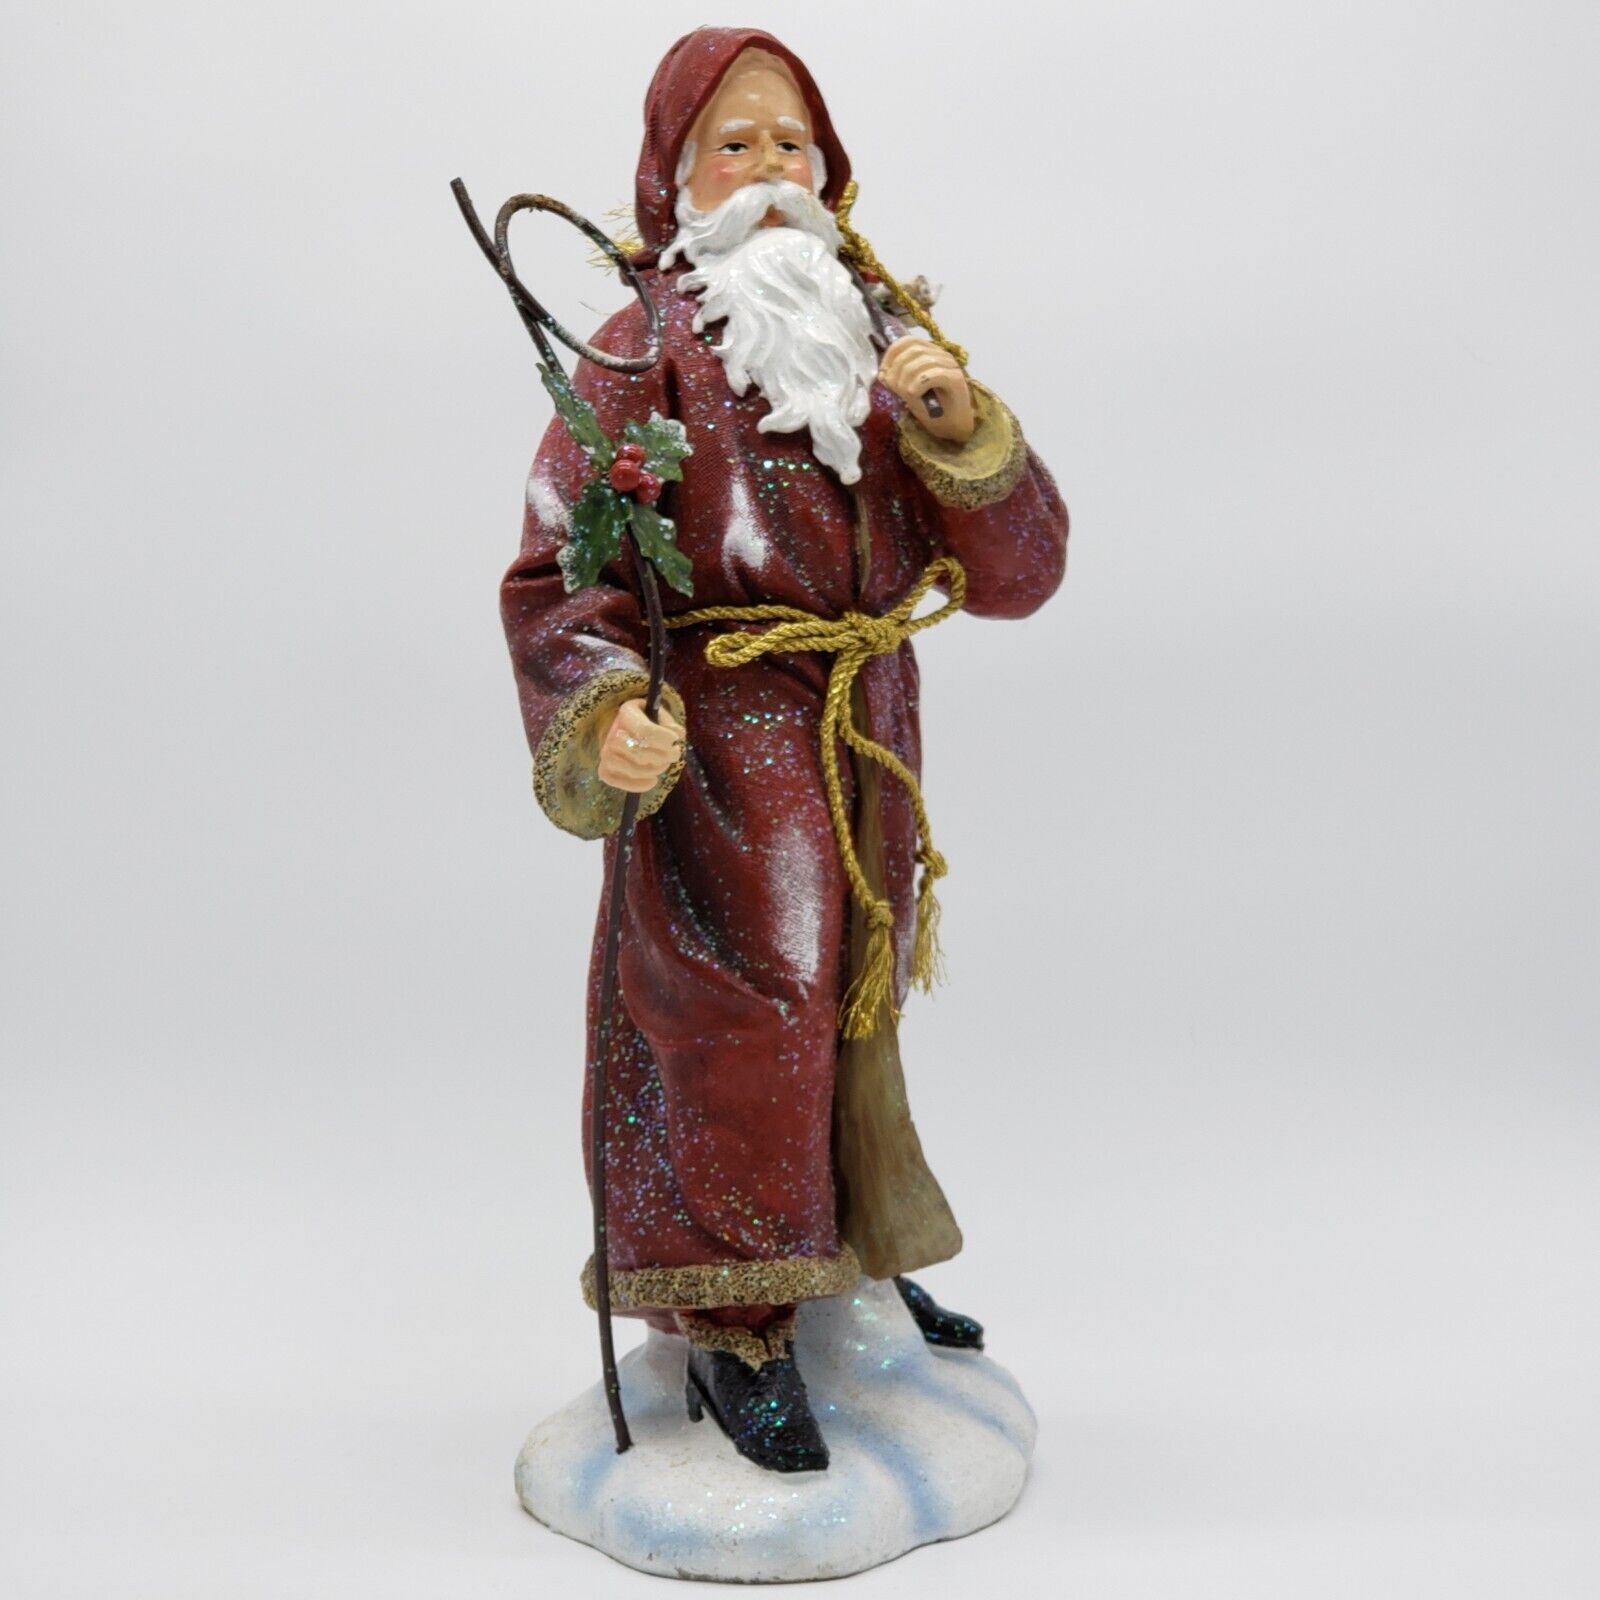 Traditional Old-World Santa Claus Statue Figurine stands 17 inches tall